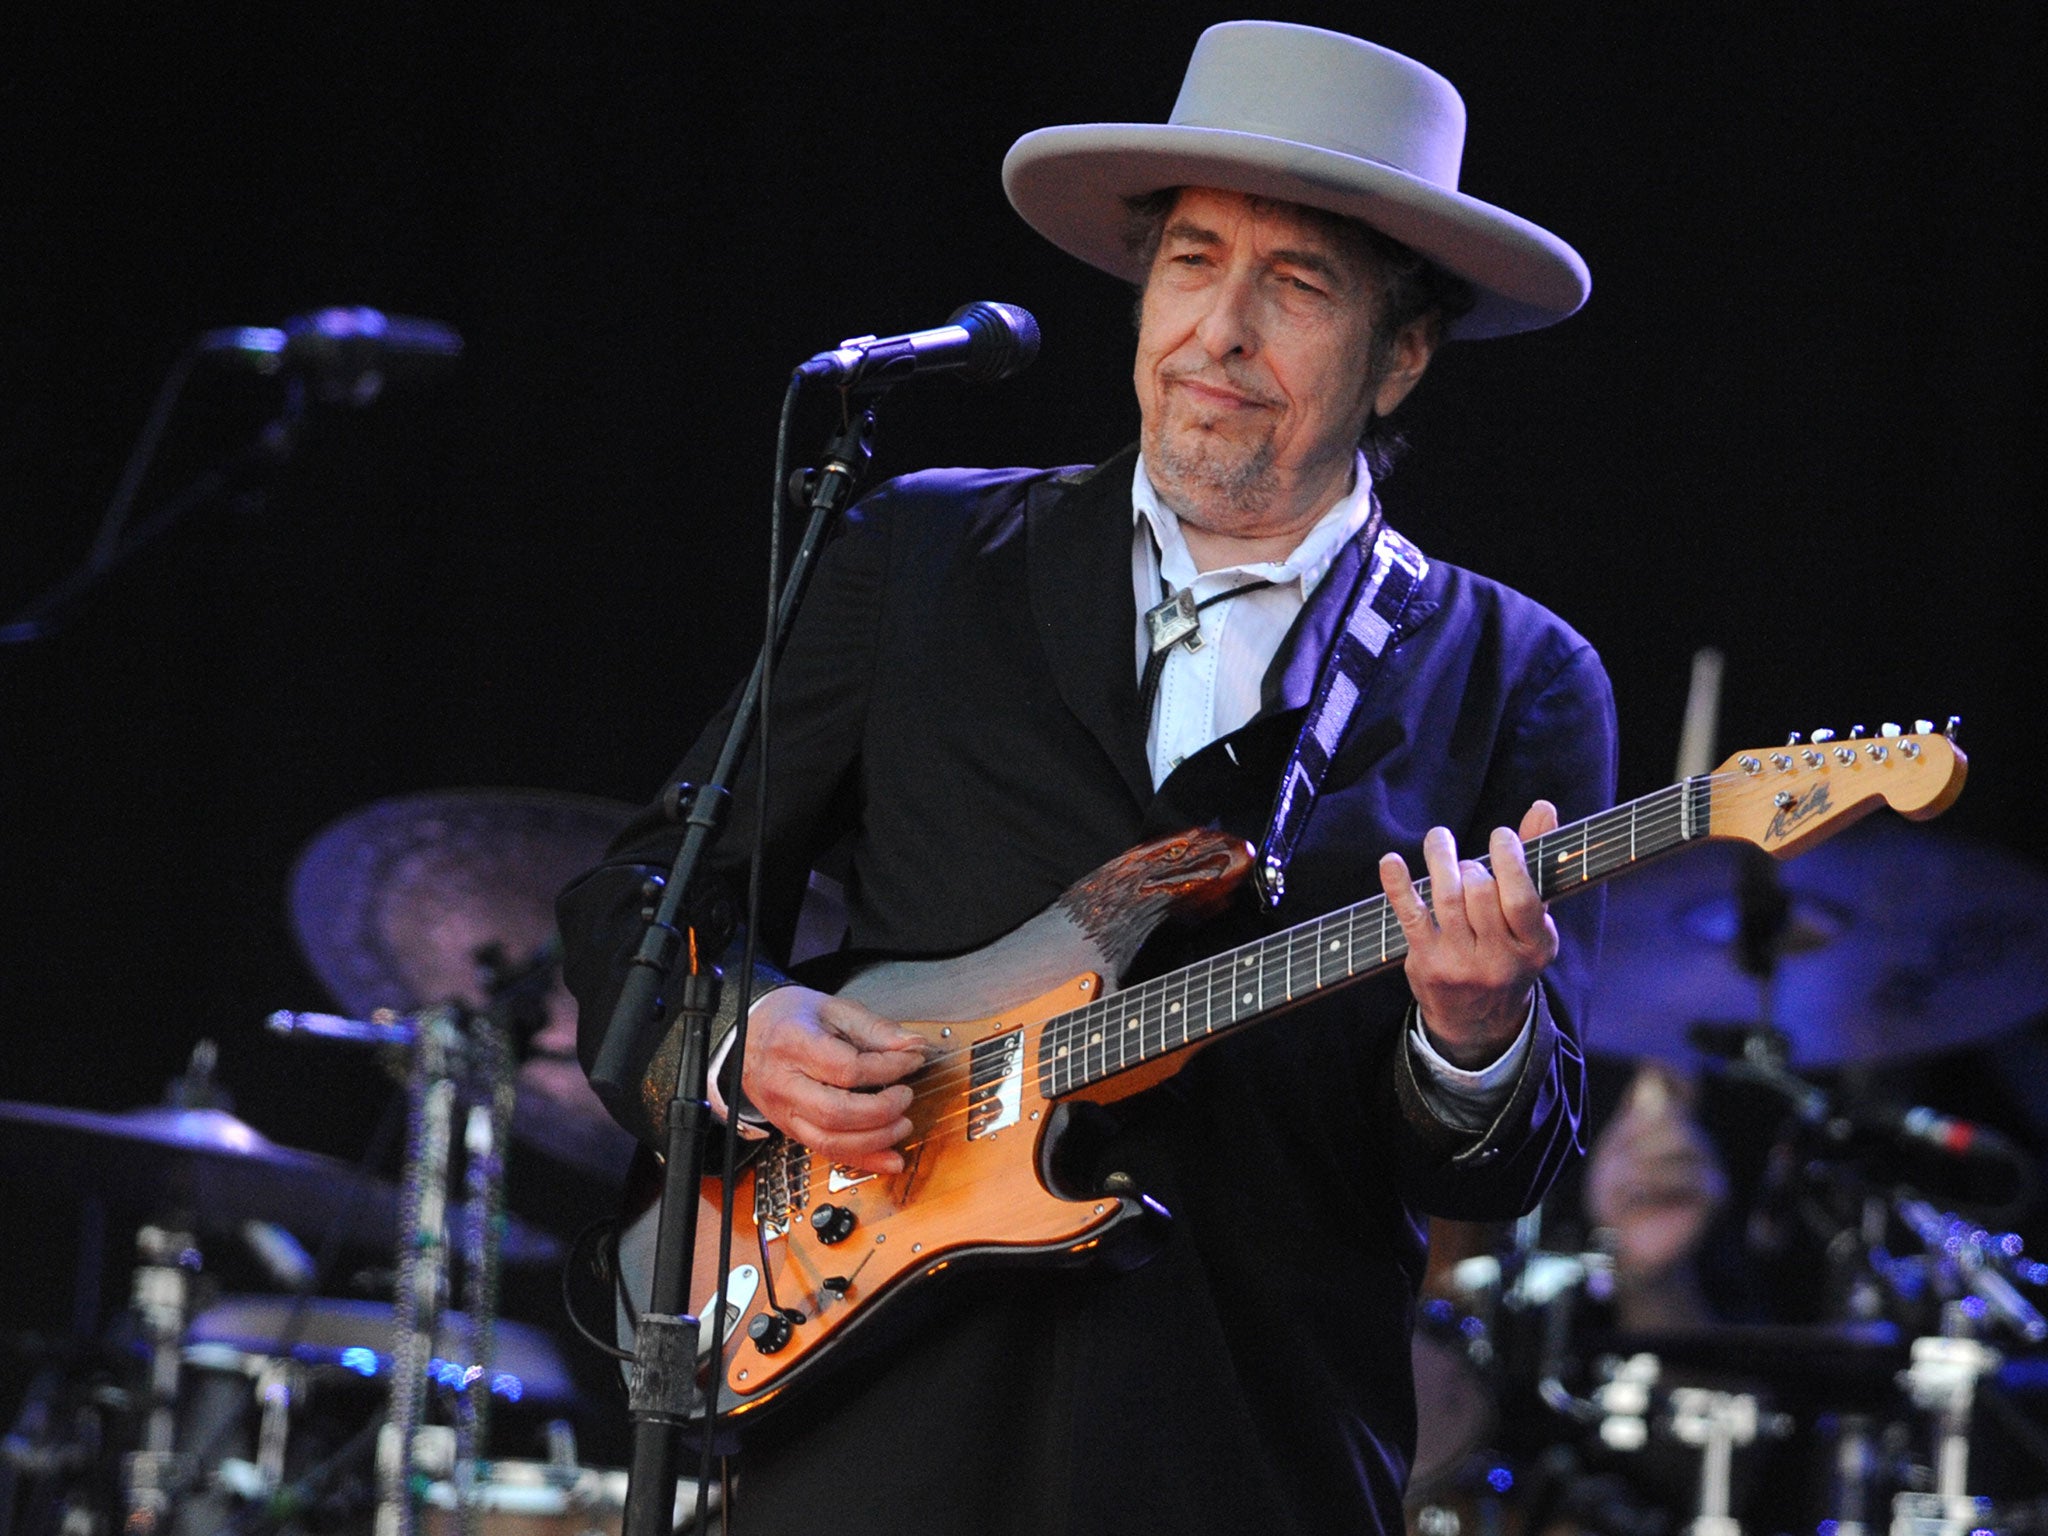 Bob Dylan's latest album is released in February